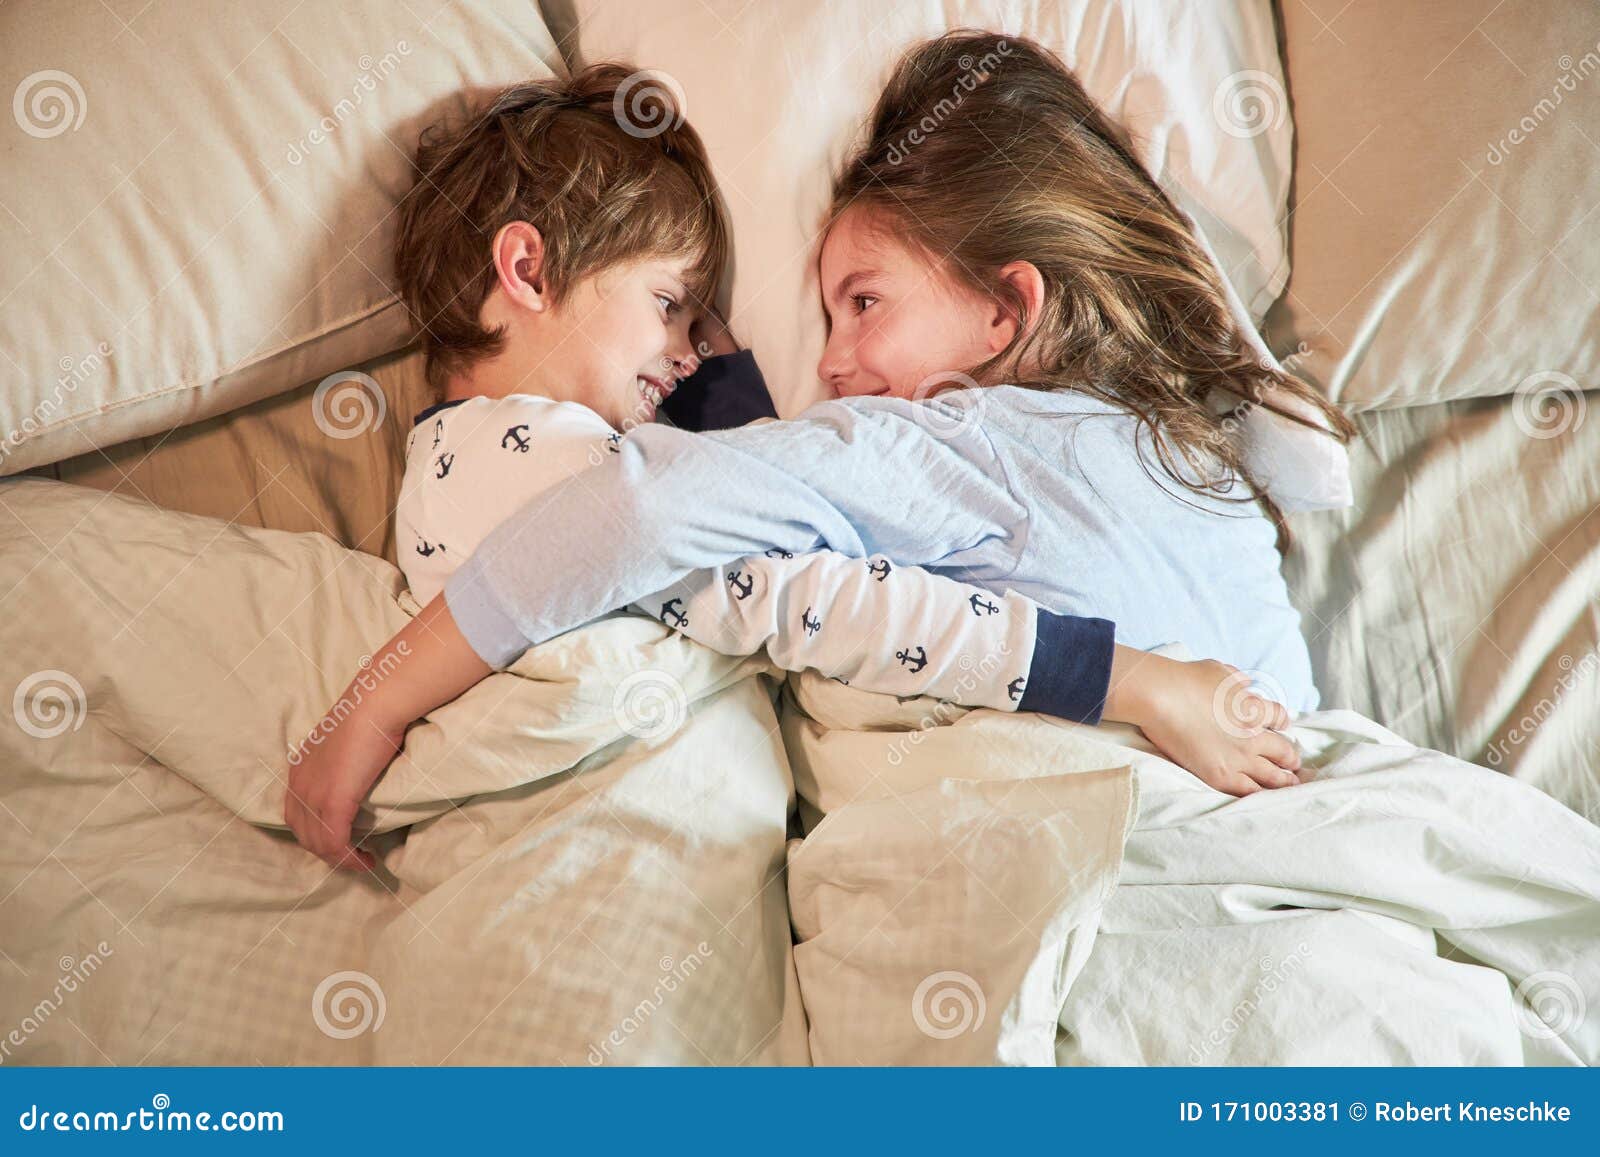 Brother and Sister Cuddle in Bed Stock Image - Image of bedroom ...